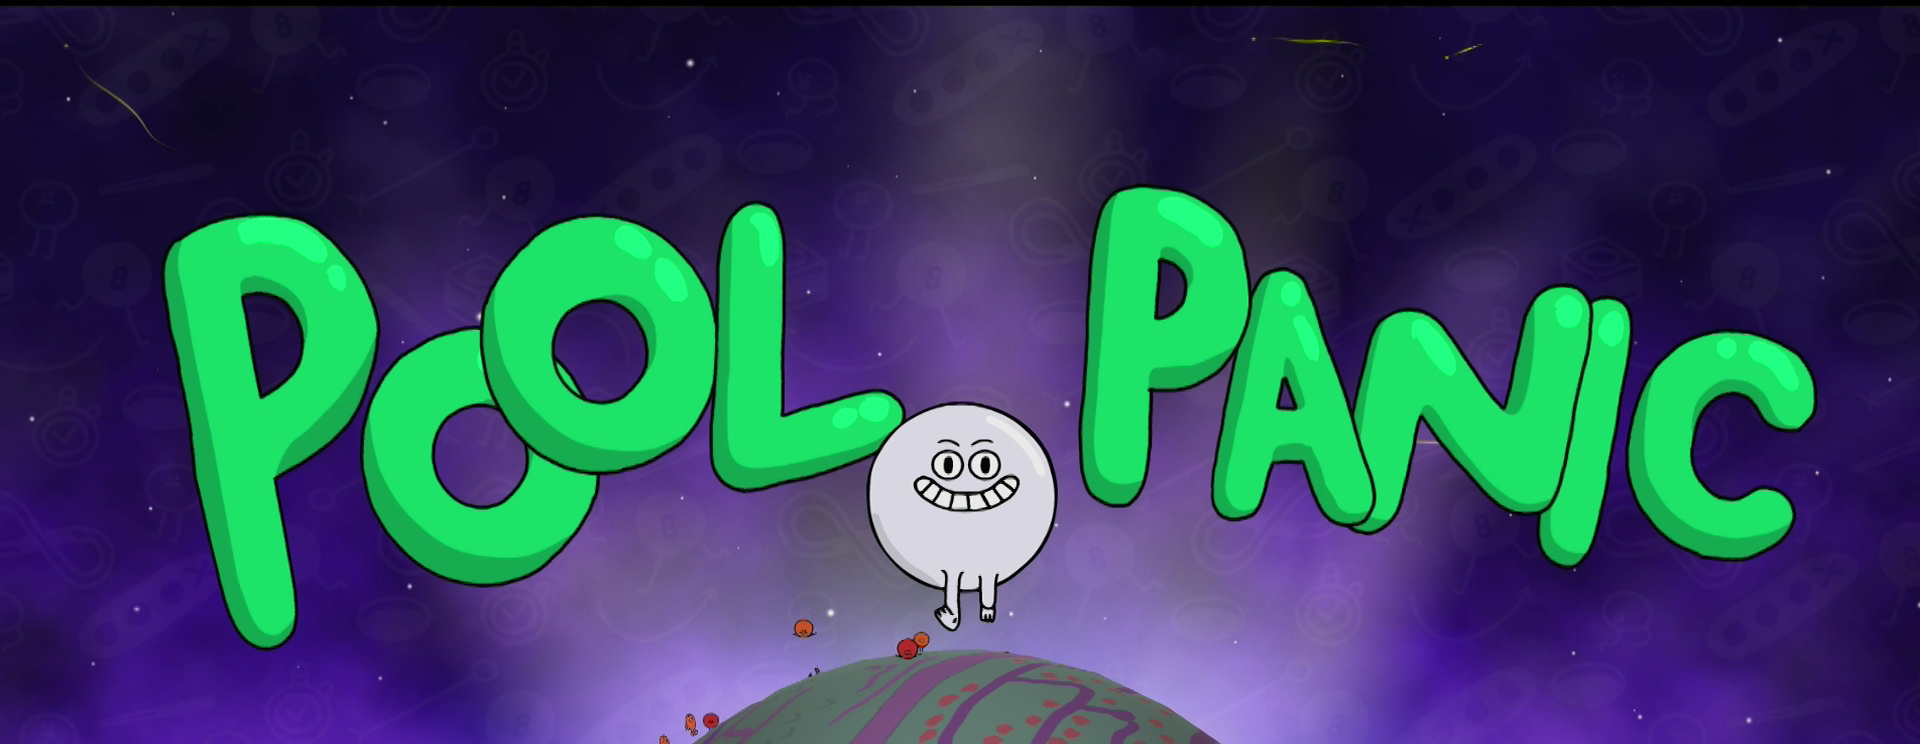 pool party panic game online free